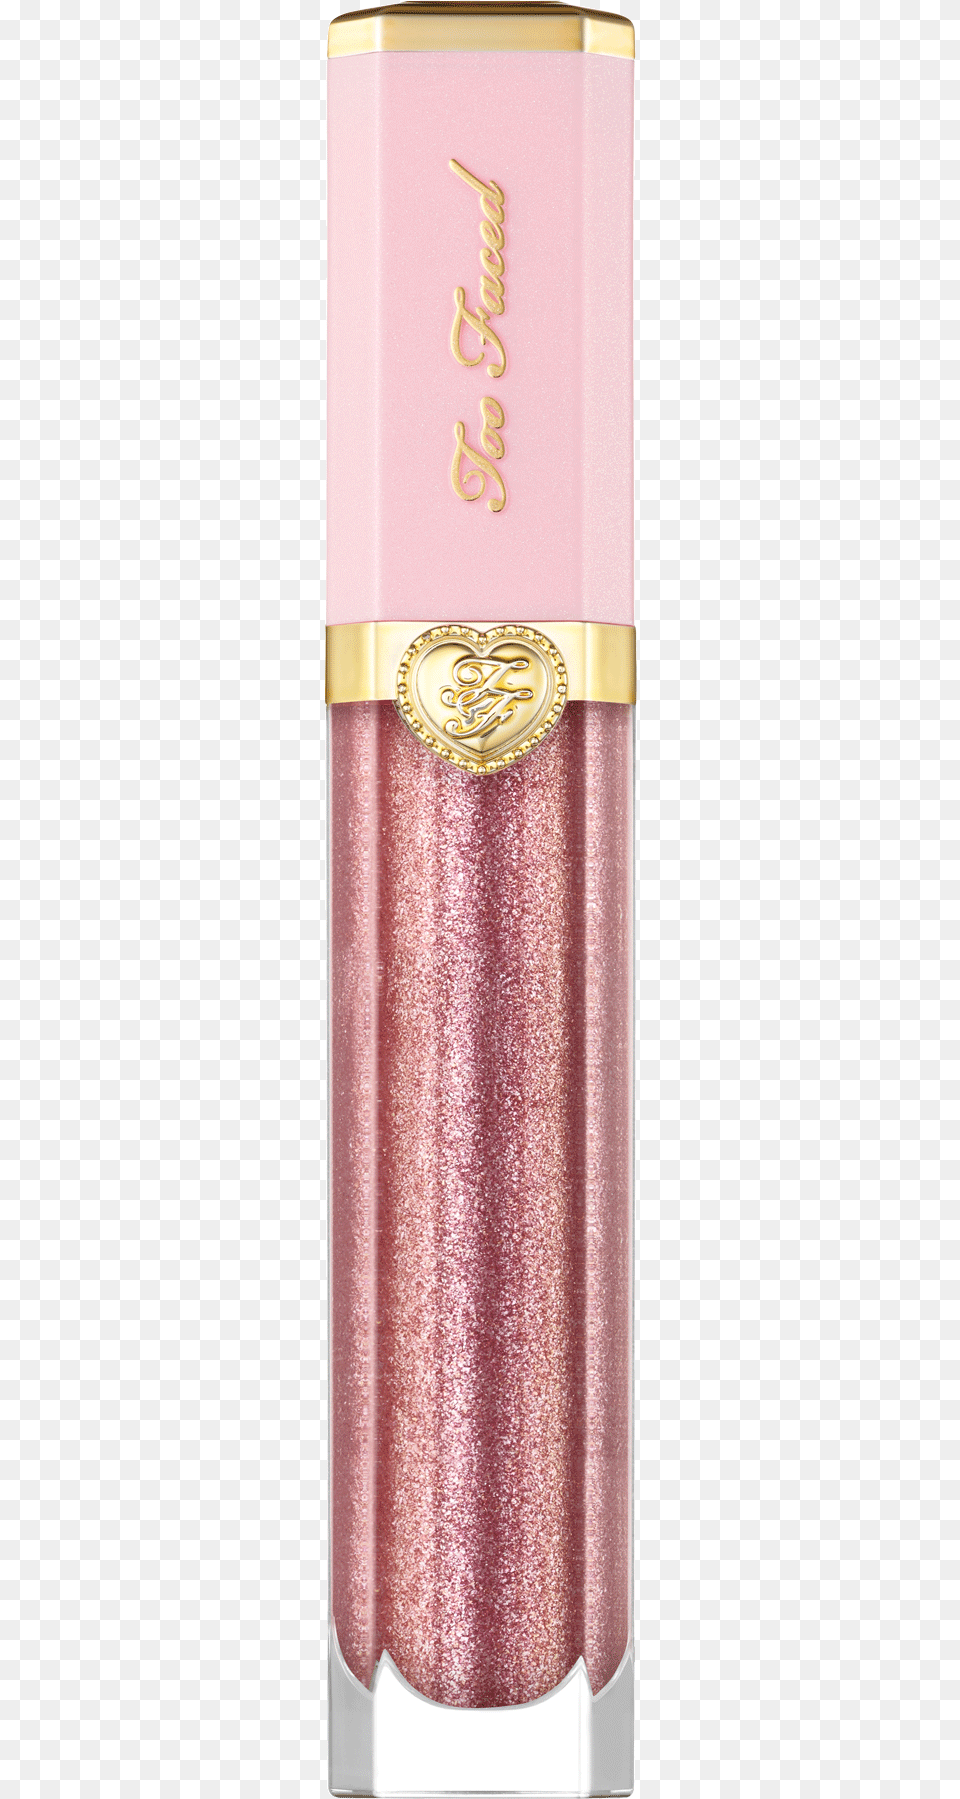 Rich Amp Dazzling Lip Gloss Raisin The Roof Bling Bling, Cosmetics, Lipstick Png